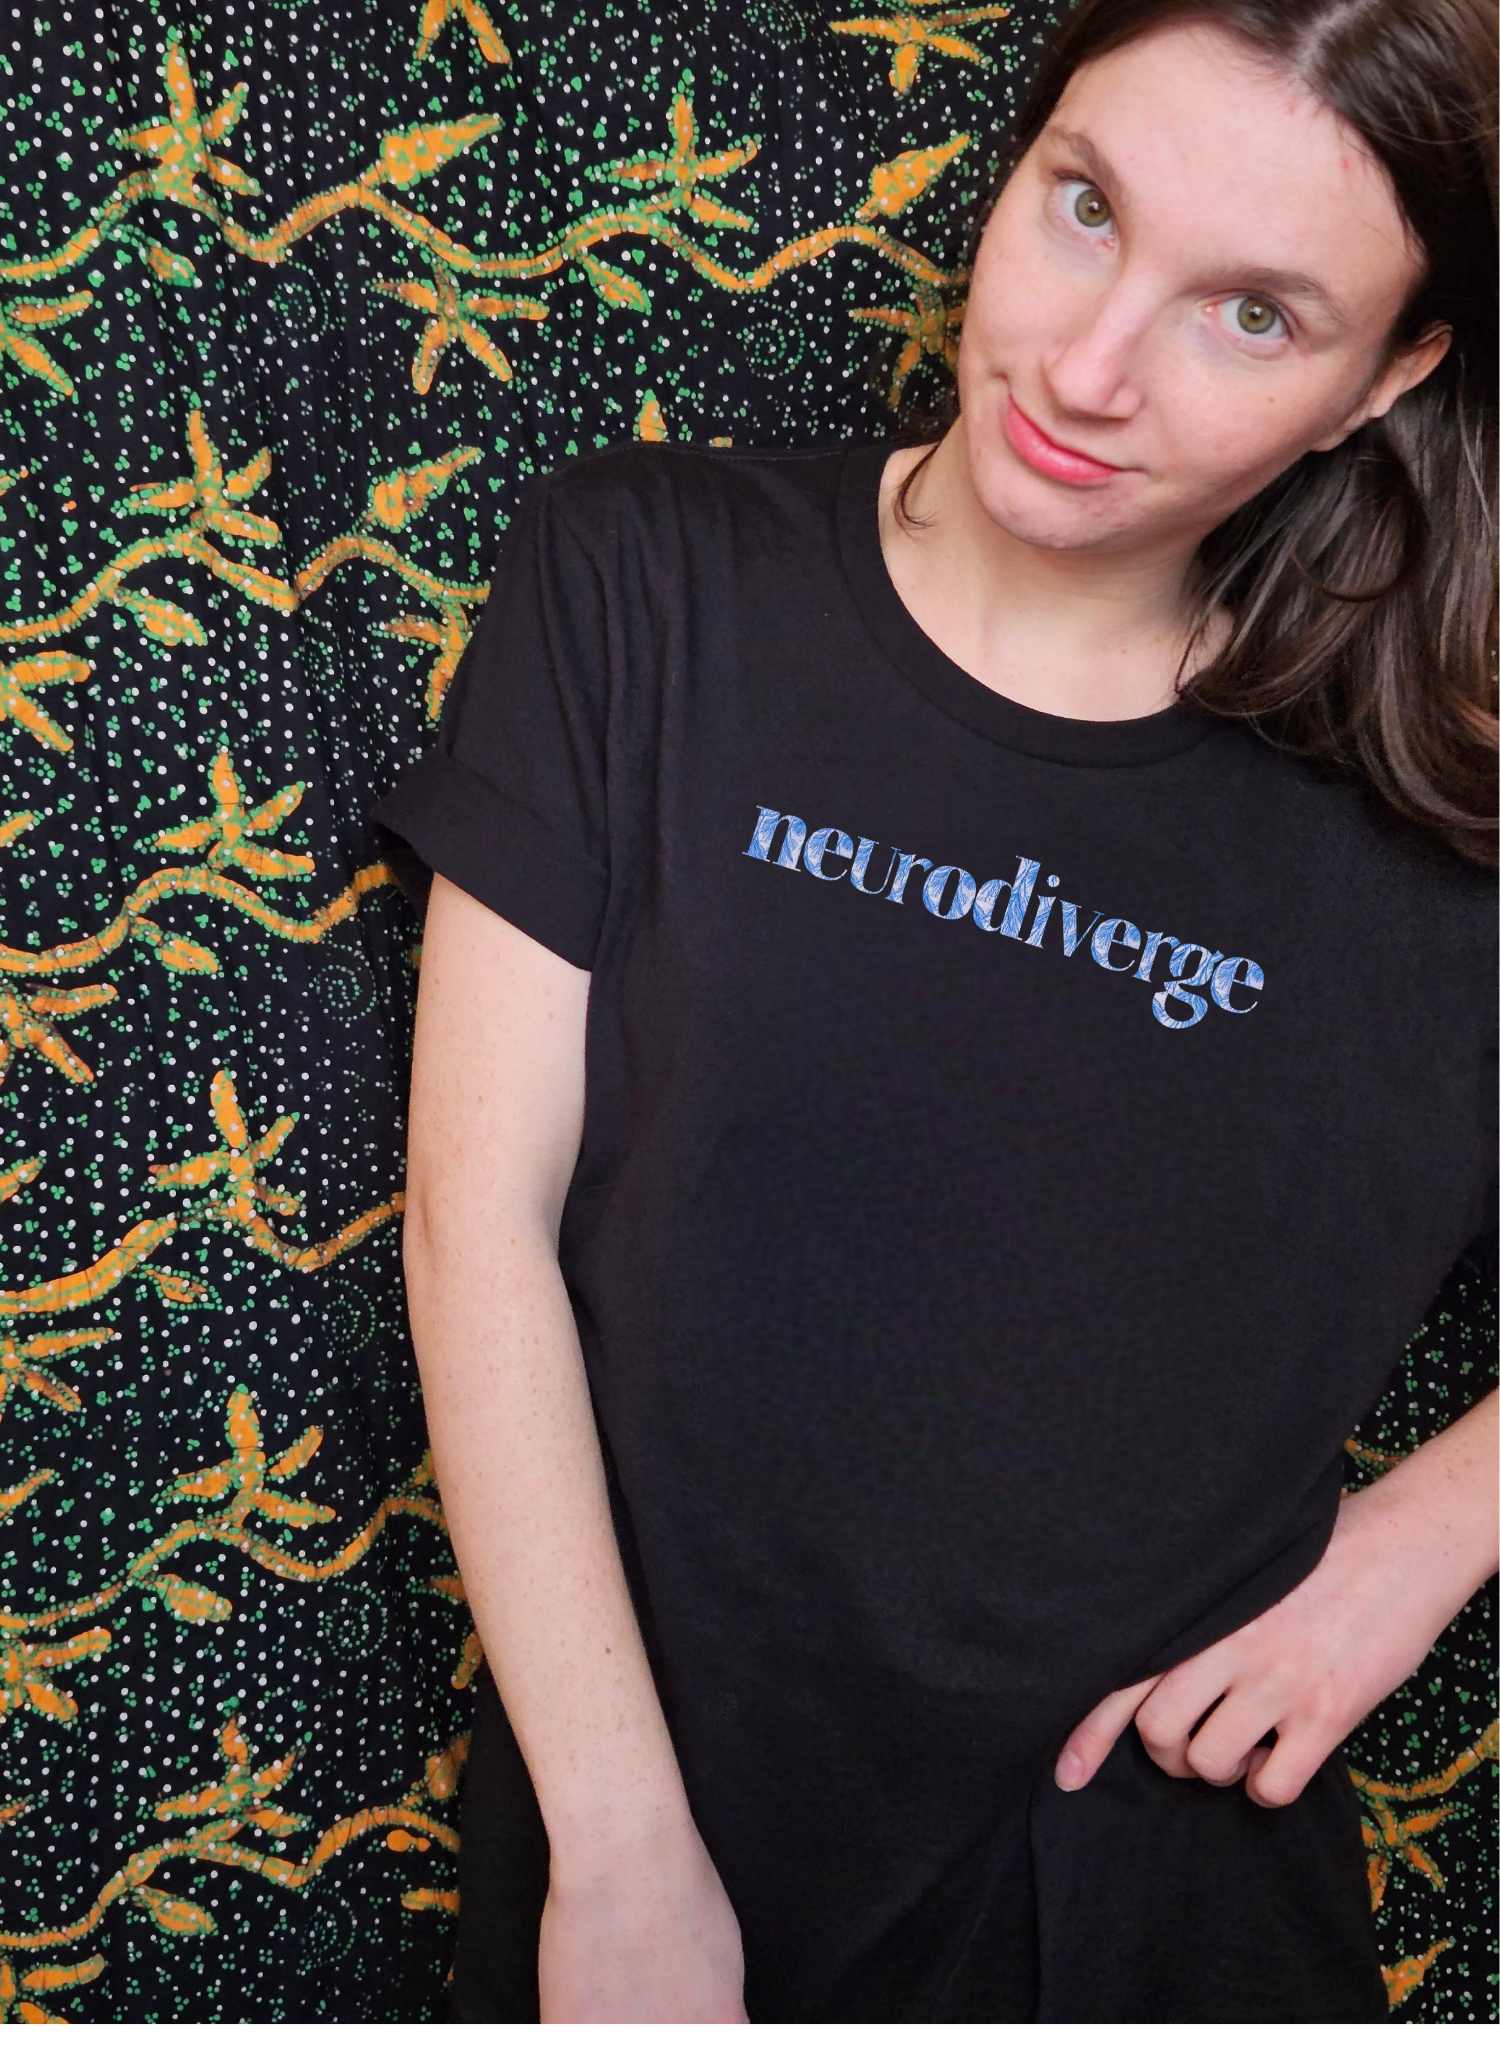 A young woman wears a black t-shirt with 'neurodiverge' lettering